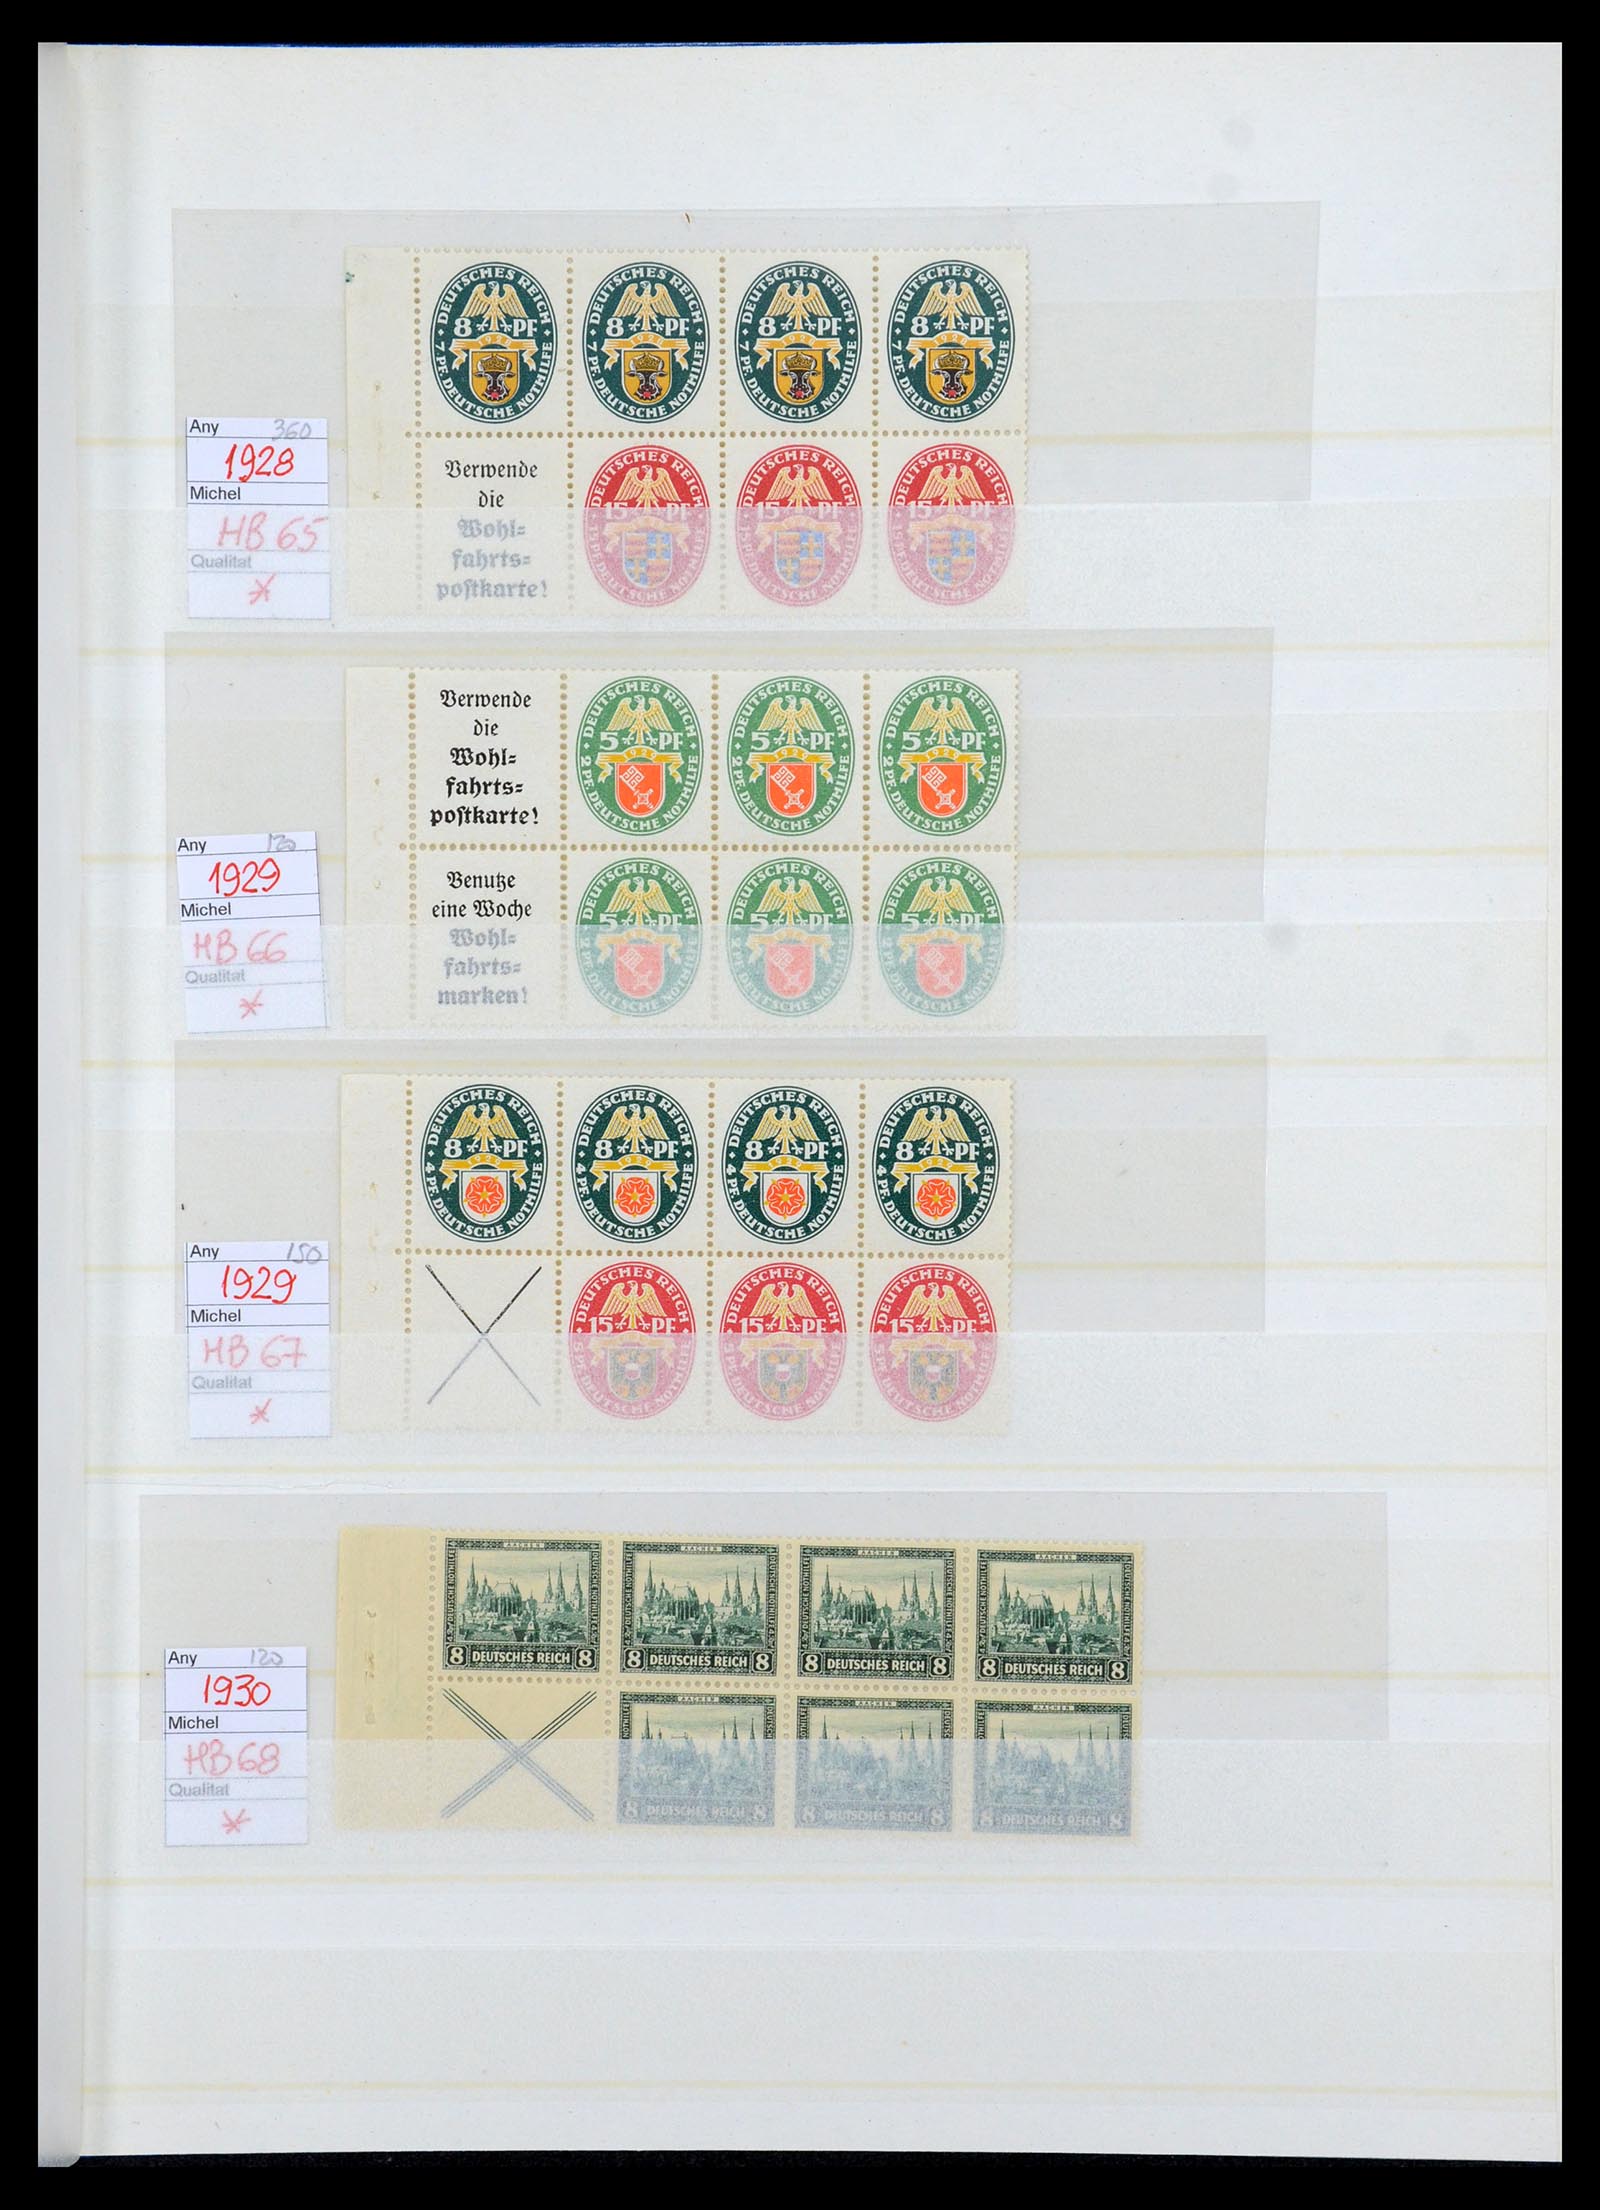 35875 003 - Stamp Collection 35875 German Reich booklet panes 1927-1939.